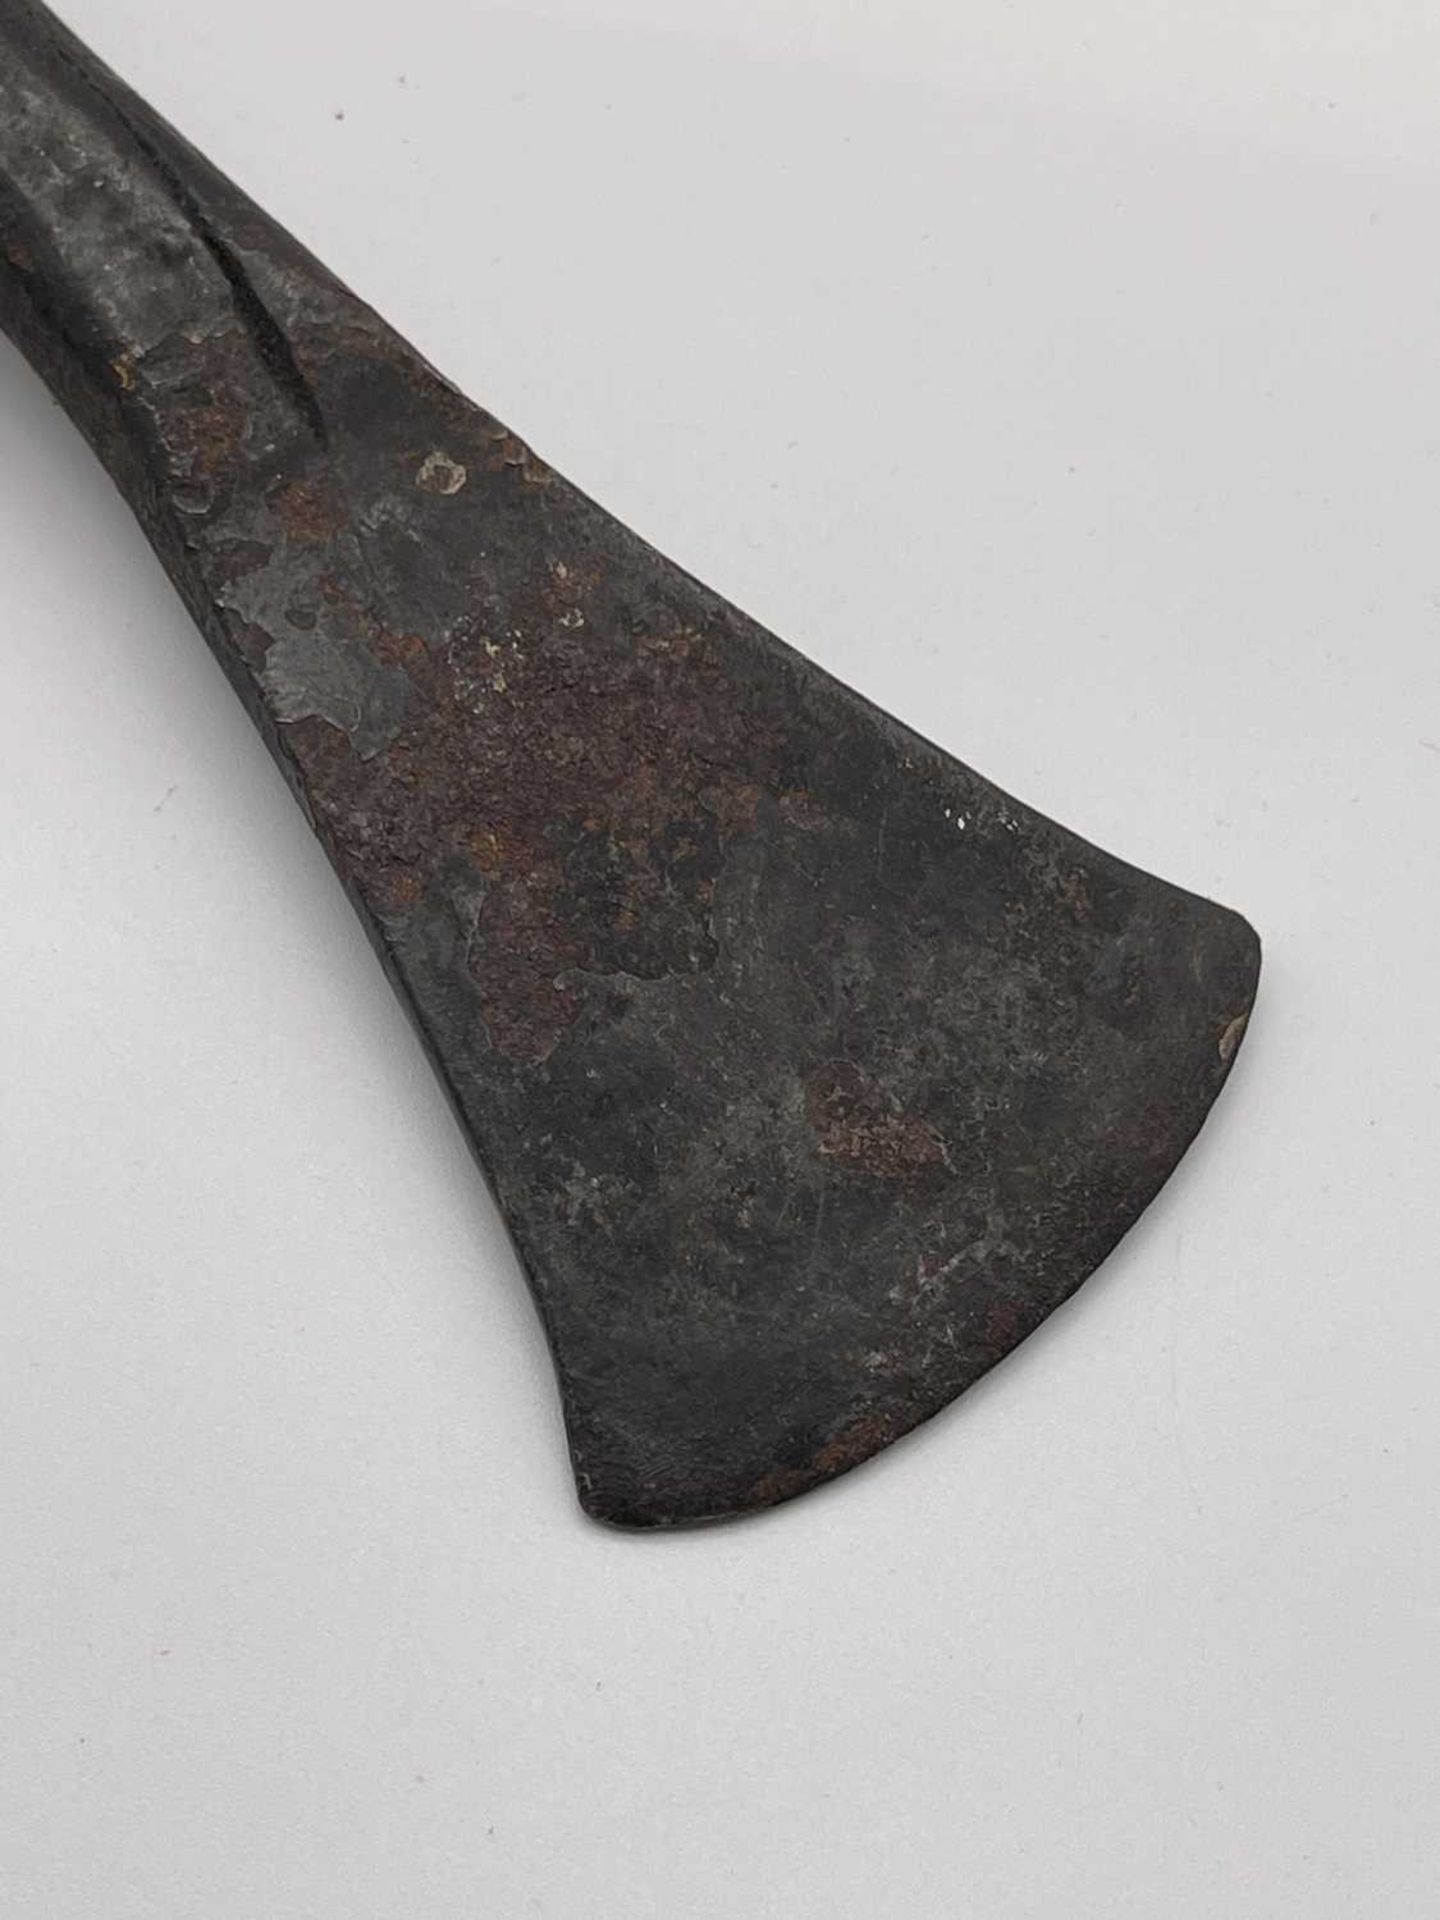 A West African hardwood axe, - Image 8 of 12